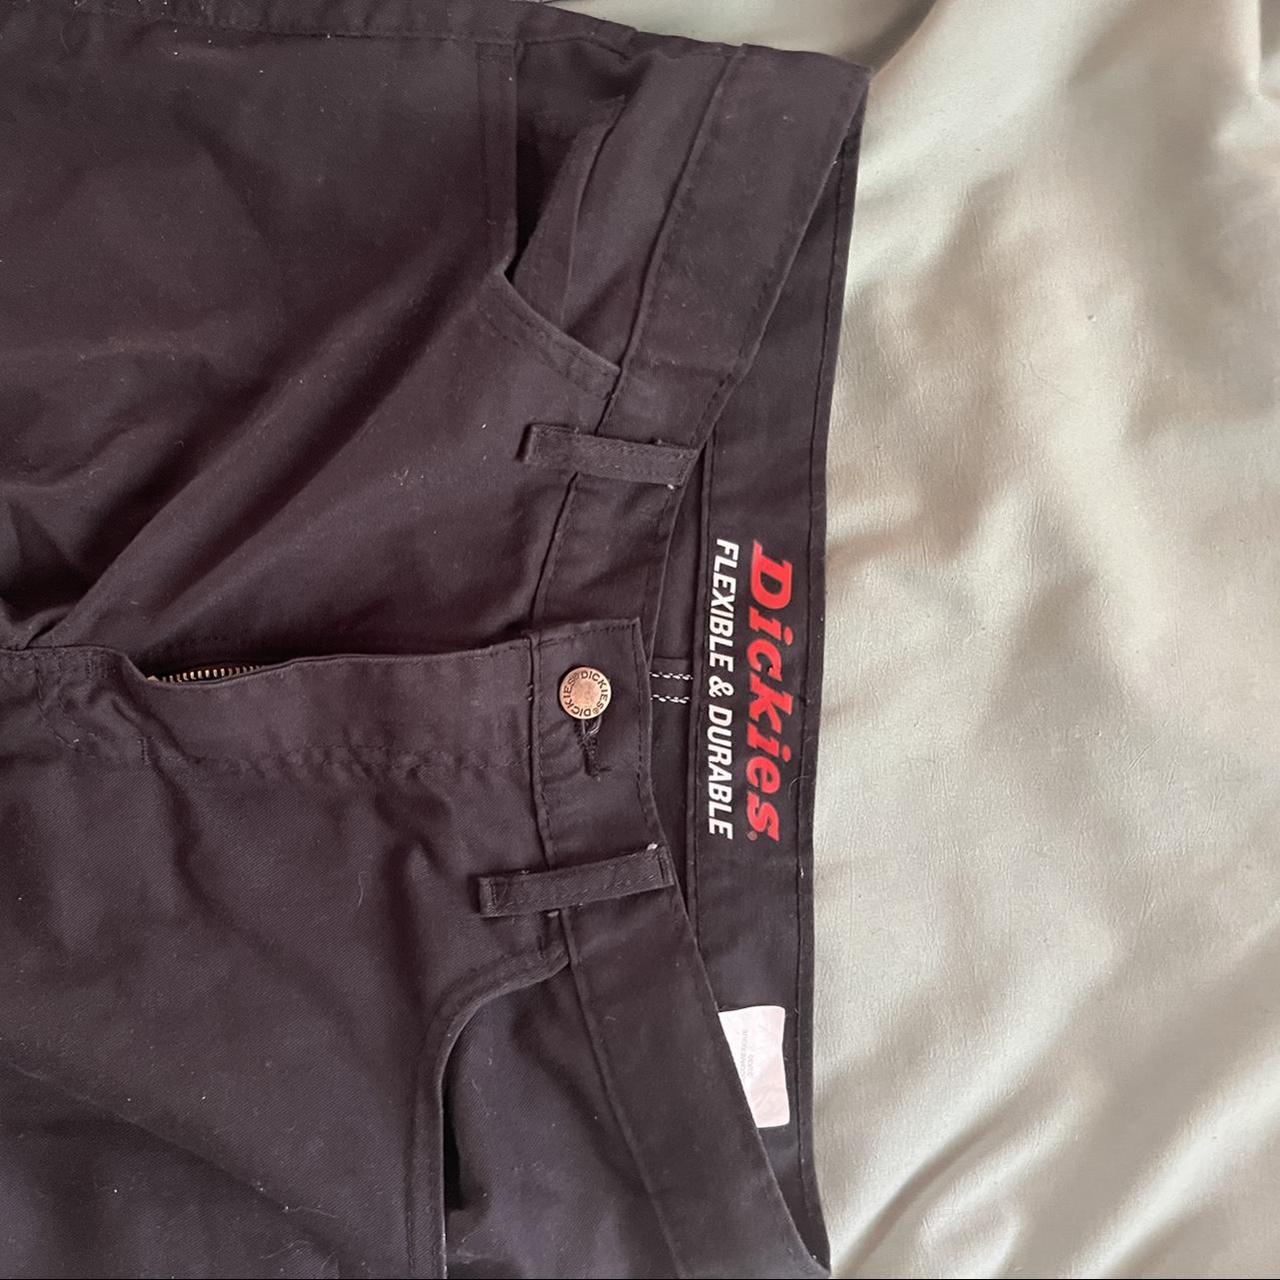 Dickies Relaxed Fit Pants - Super cute and comfy I - Depop